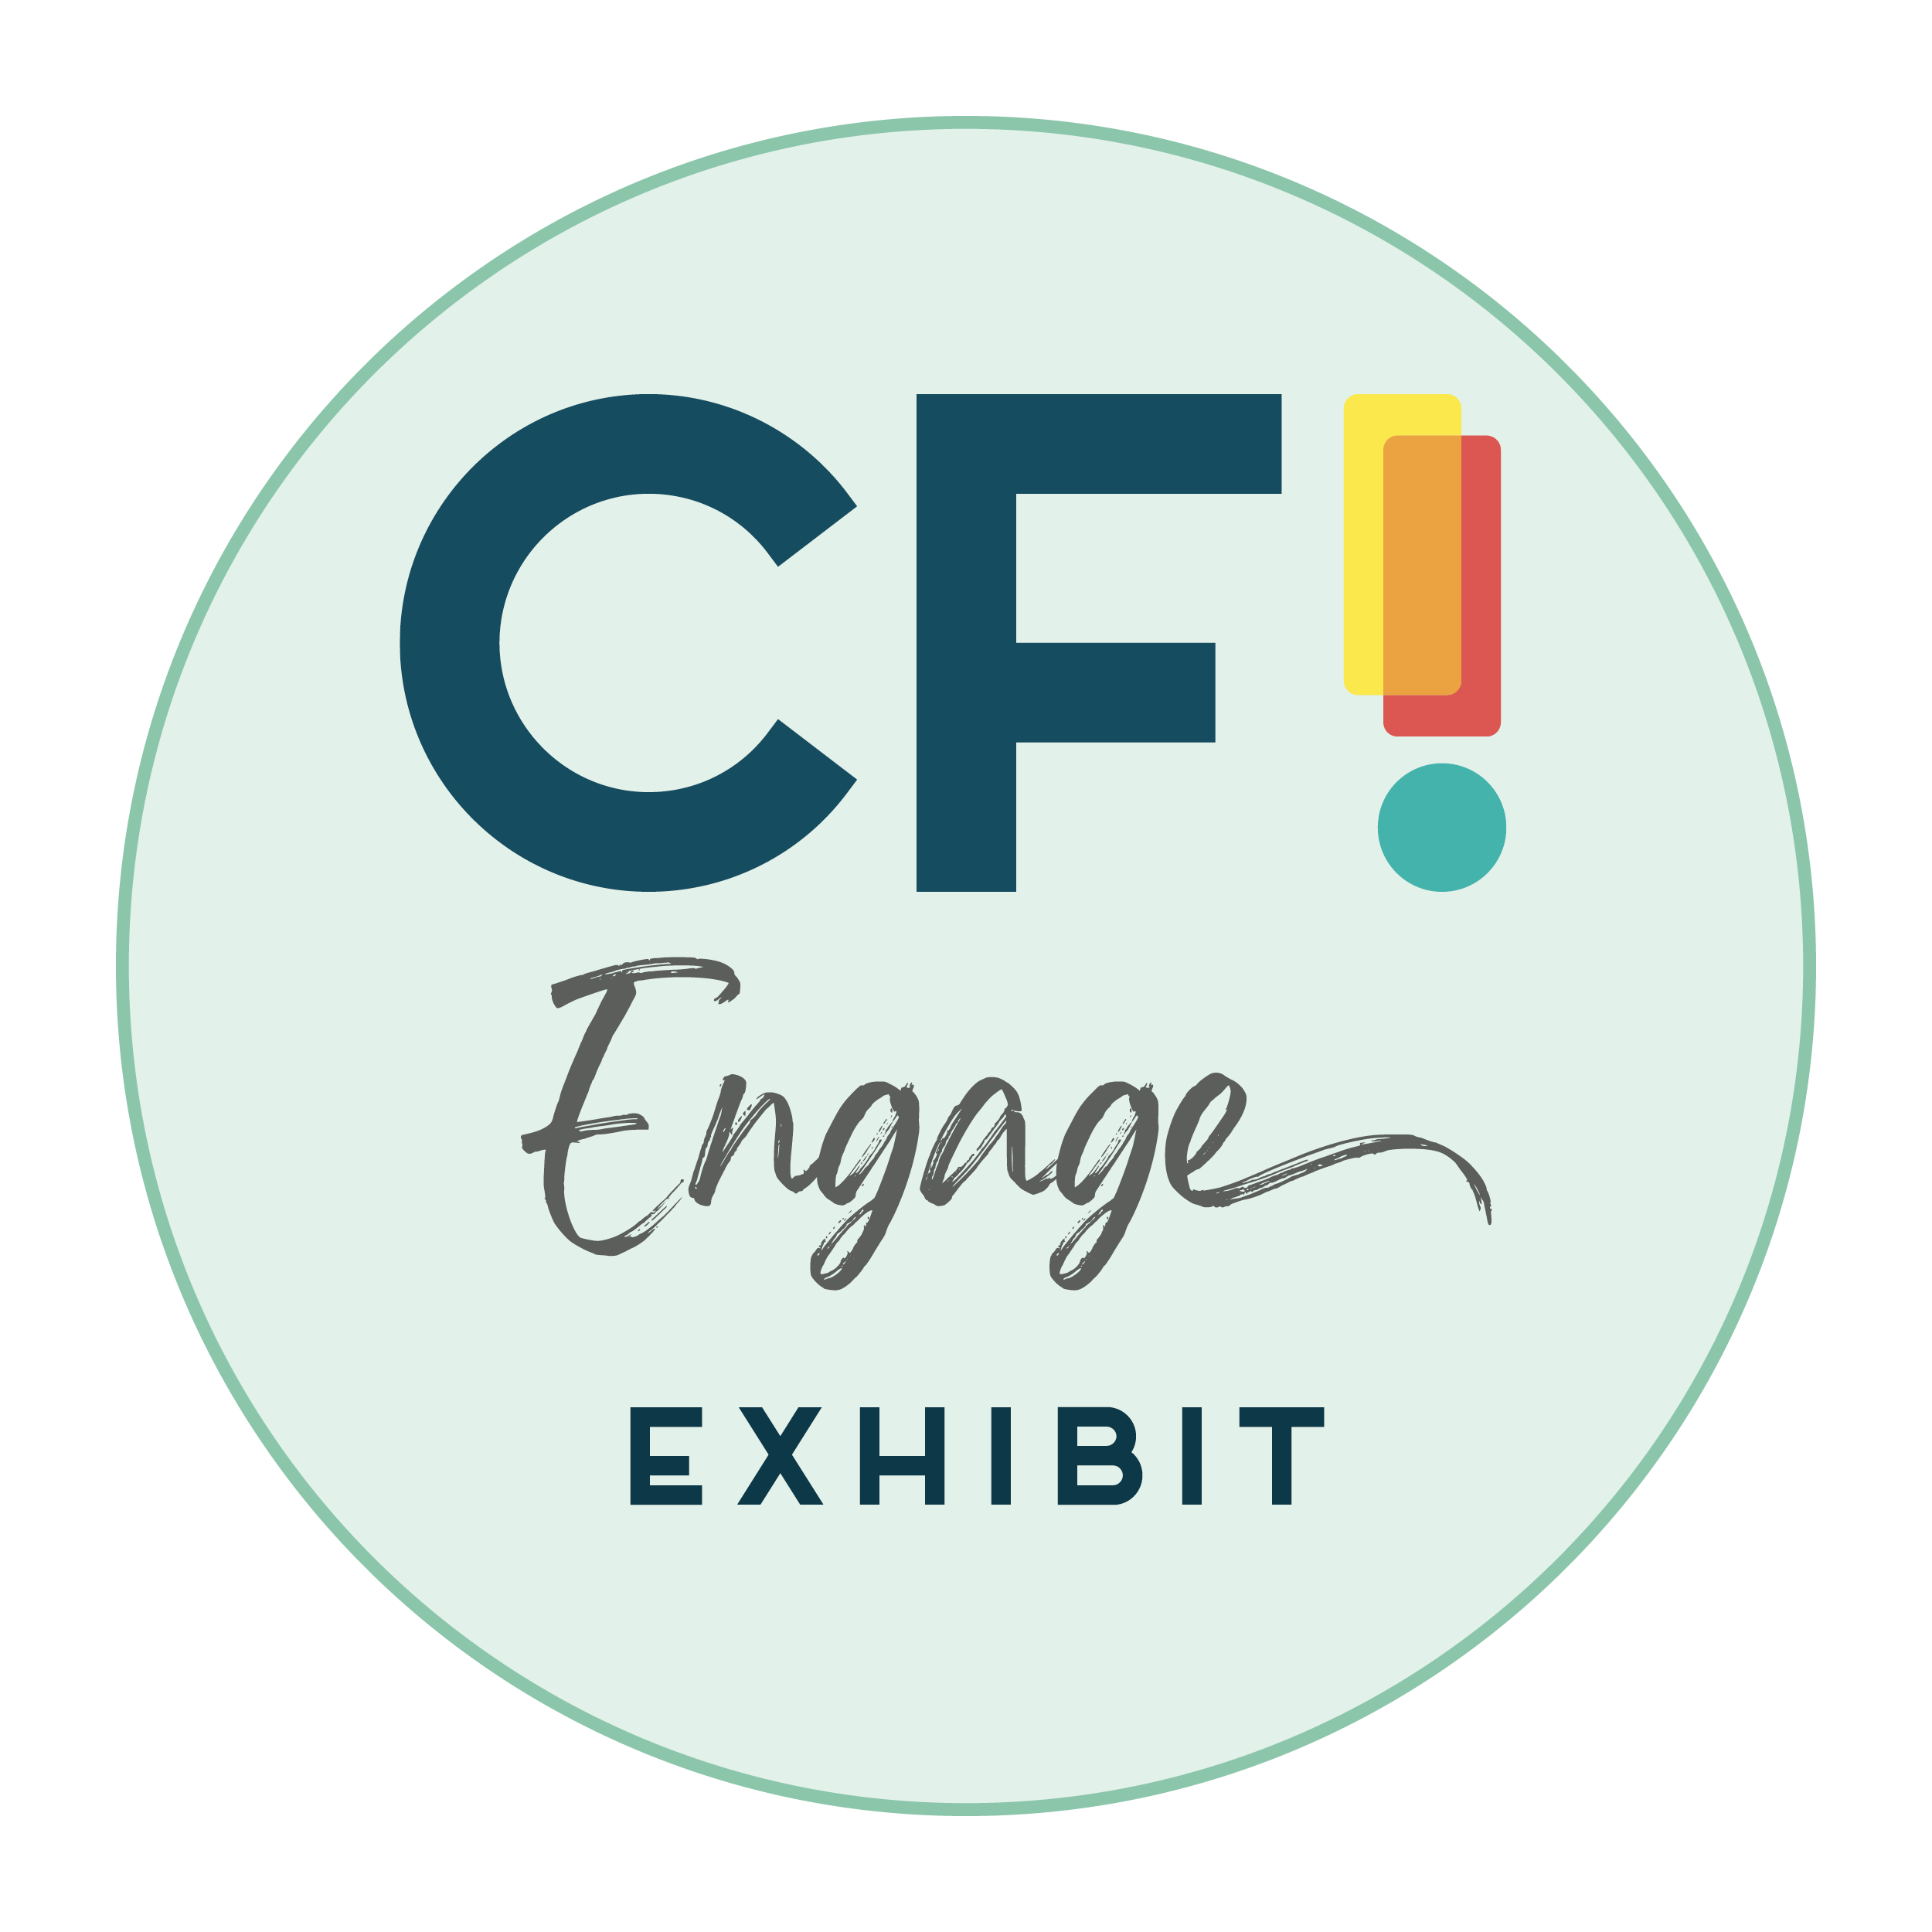 Graphic in a circle with CF! Engage EXHIBIT text within the circle.